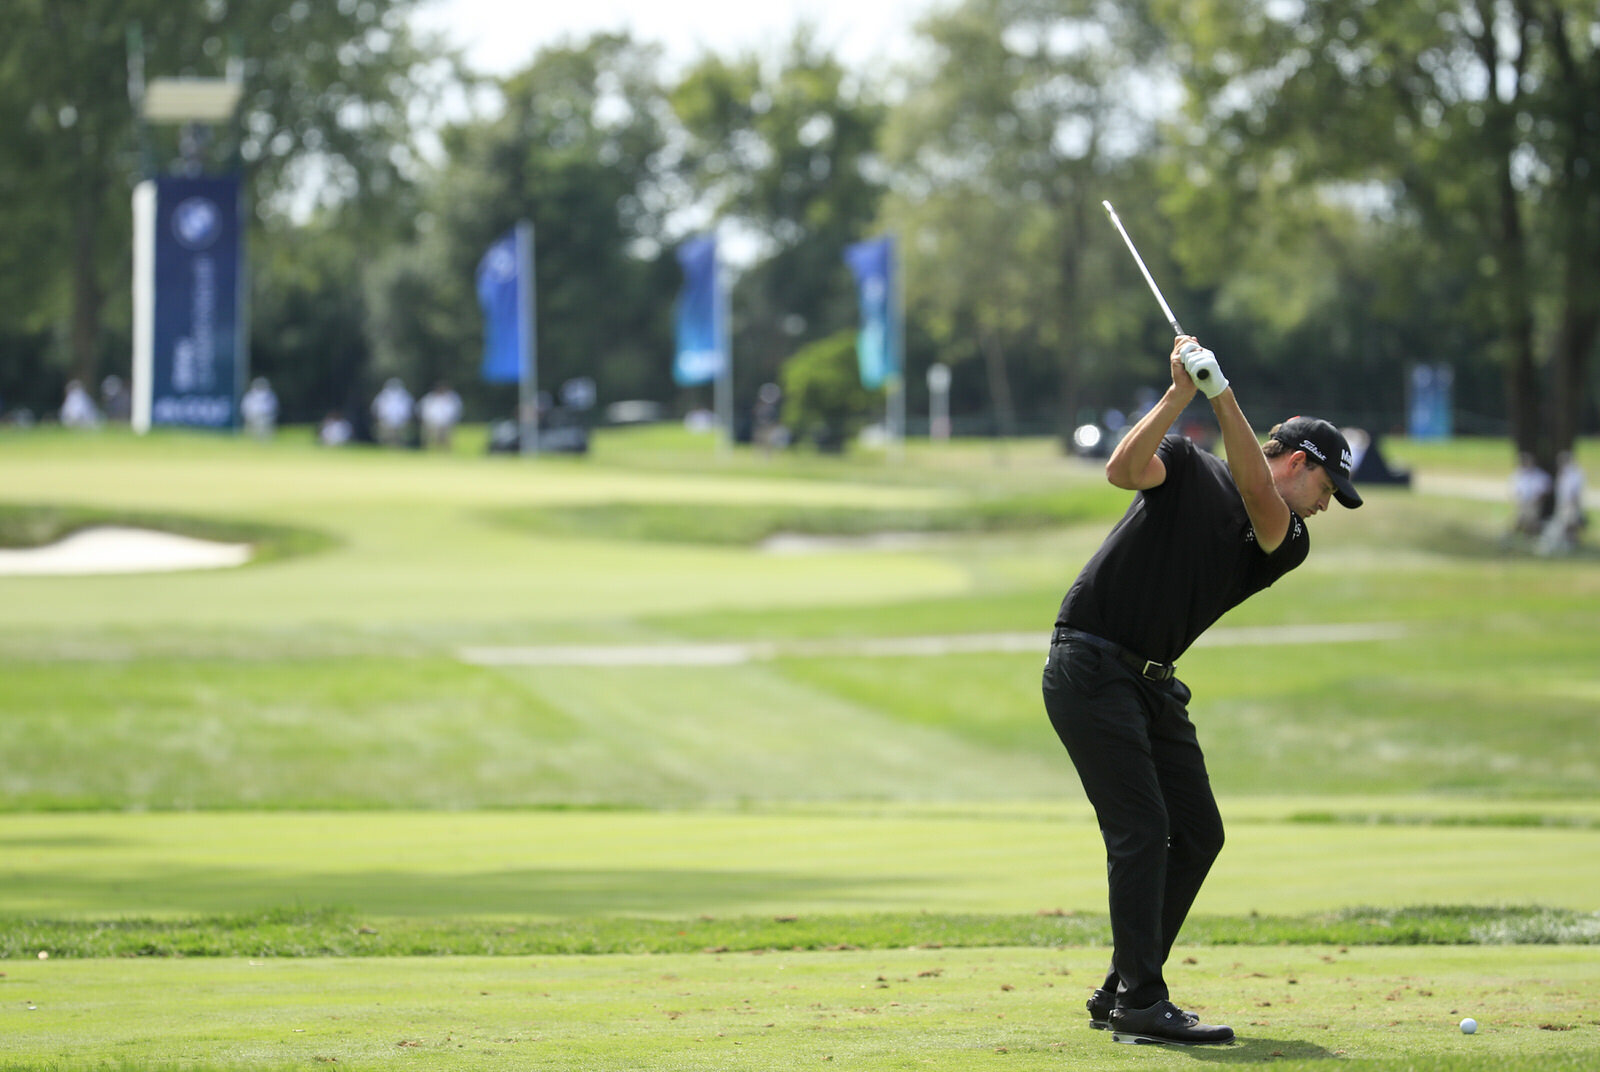  OLYMPIA FIELDS, ILLINOIS - AUGUST 29: Patrick Cantlay of the United States plays his shot from the eighth tee during the third round of the BMW Championship on the North Course at Olympia Fields Country Club on August 29, 2020 in Olympia Fields, Ill